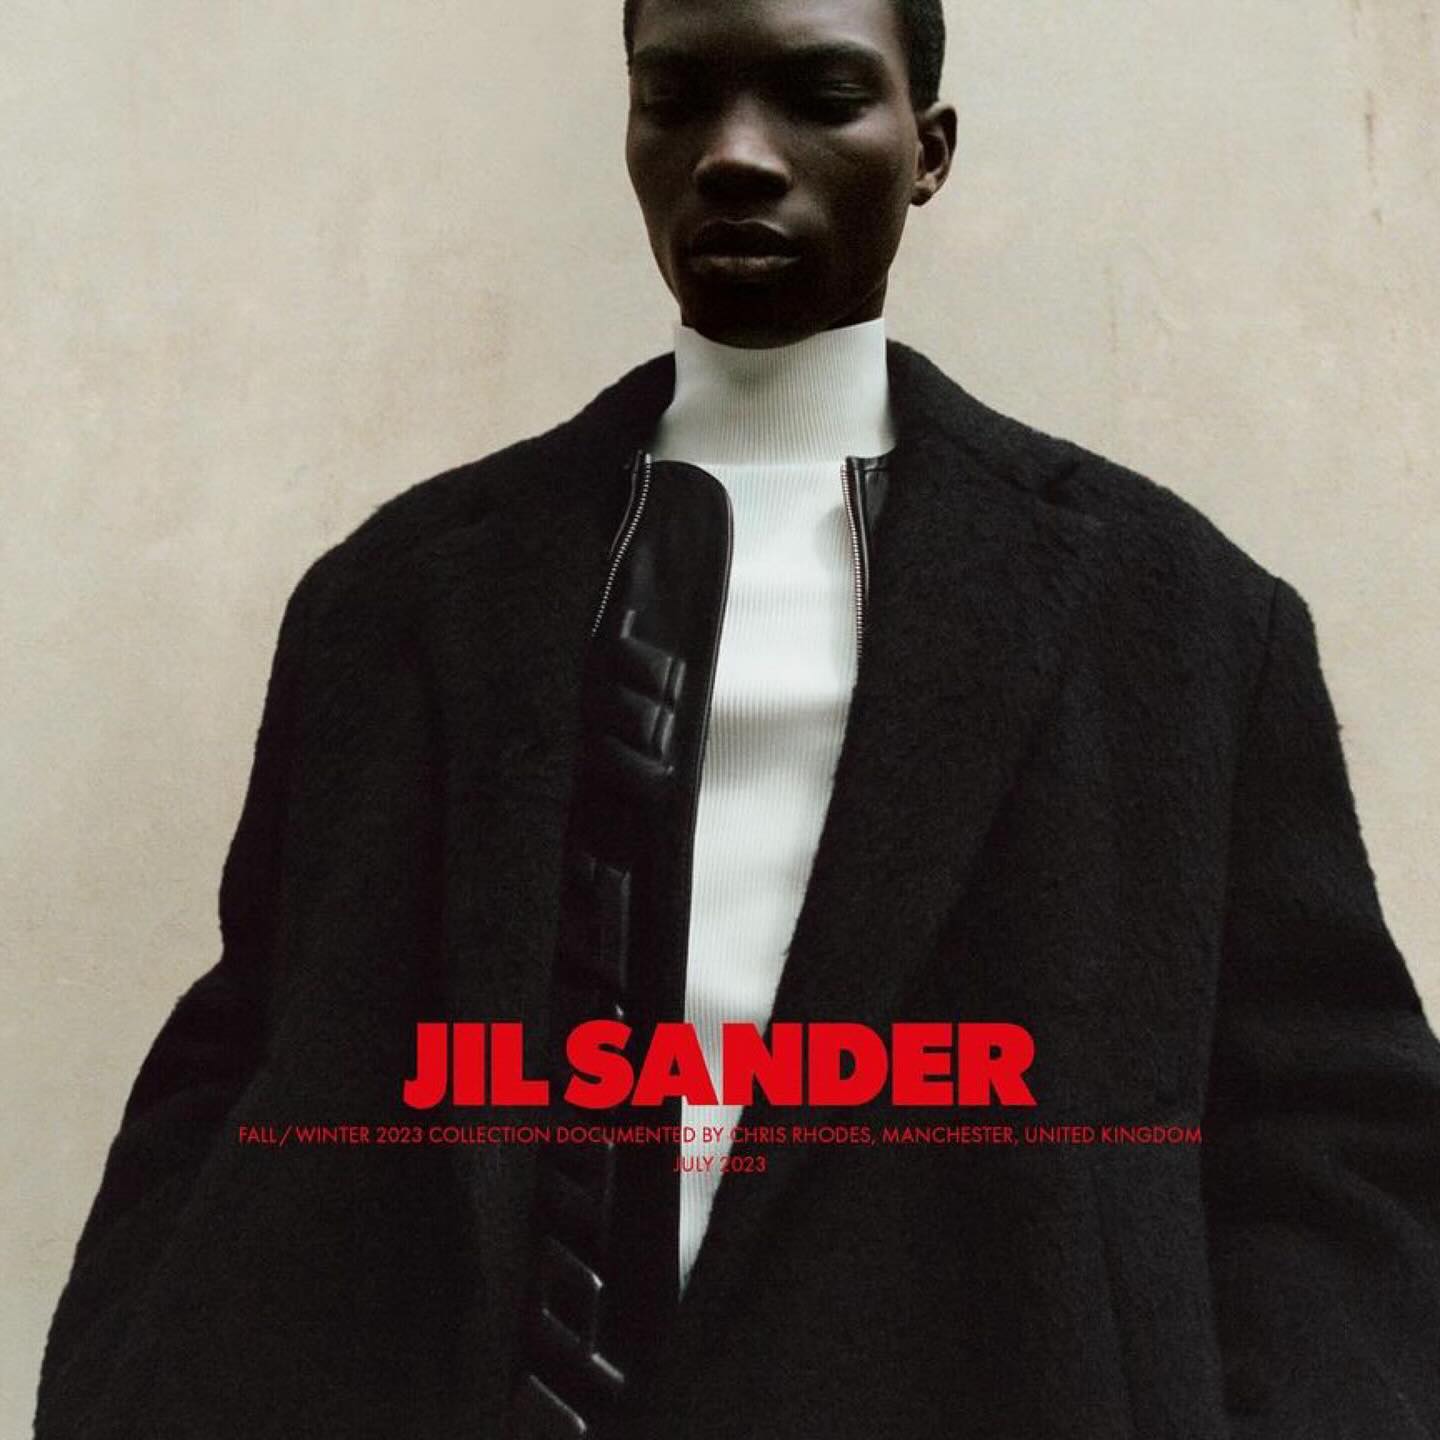 @jilsander F/W23 collection, shot by @chris.rhodes ????

It was a pleasure to serve as the production hub & ecom studio earlier this year for @ragidholakiaproductions , as the team took to the streets of Manchester to photograph the campaign.

#jilsander #campaign #fashioncampaign #fw23 #fw23collection #designer #designerfashion #production #creative#venuehiremanchester #shootday #editorial #producer #production #manchesterphotography #photographer #ecom #ecomstudio #fashion#photography #highfashion #fivefourstudios #manchester